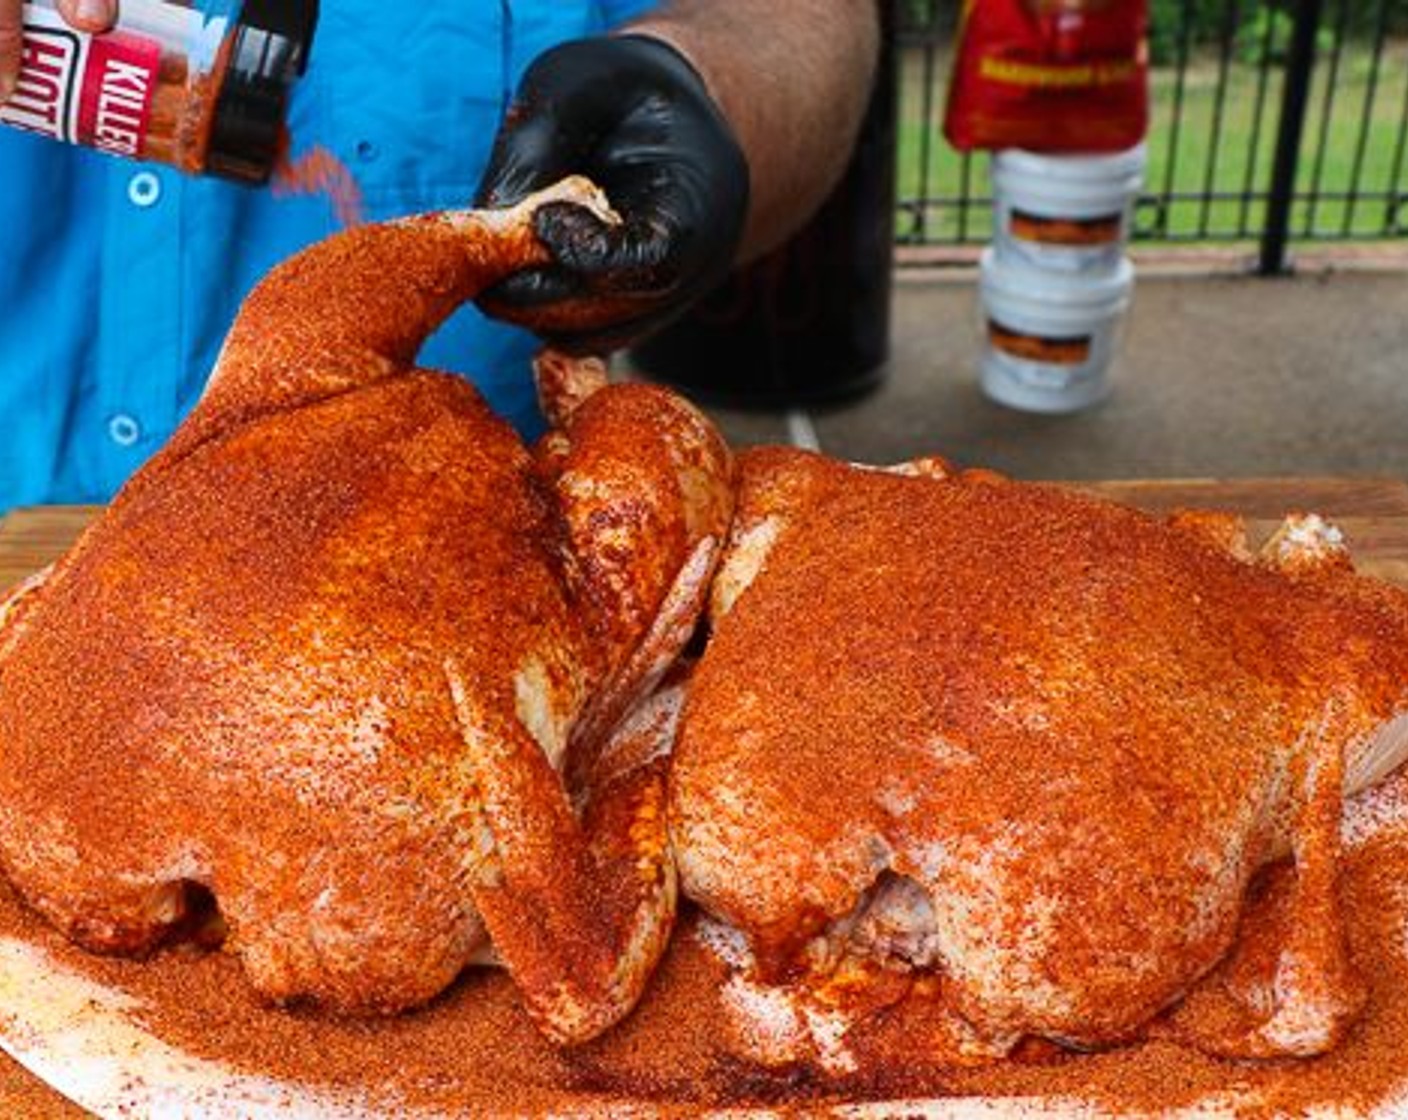 step 4 Spray the outer skin with Vegetable Oil Cooking Spray (as needed). Season well with Barbecue Rub (2 Tbsp).